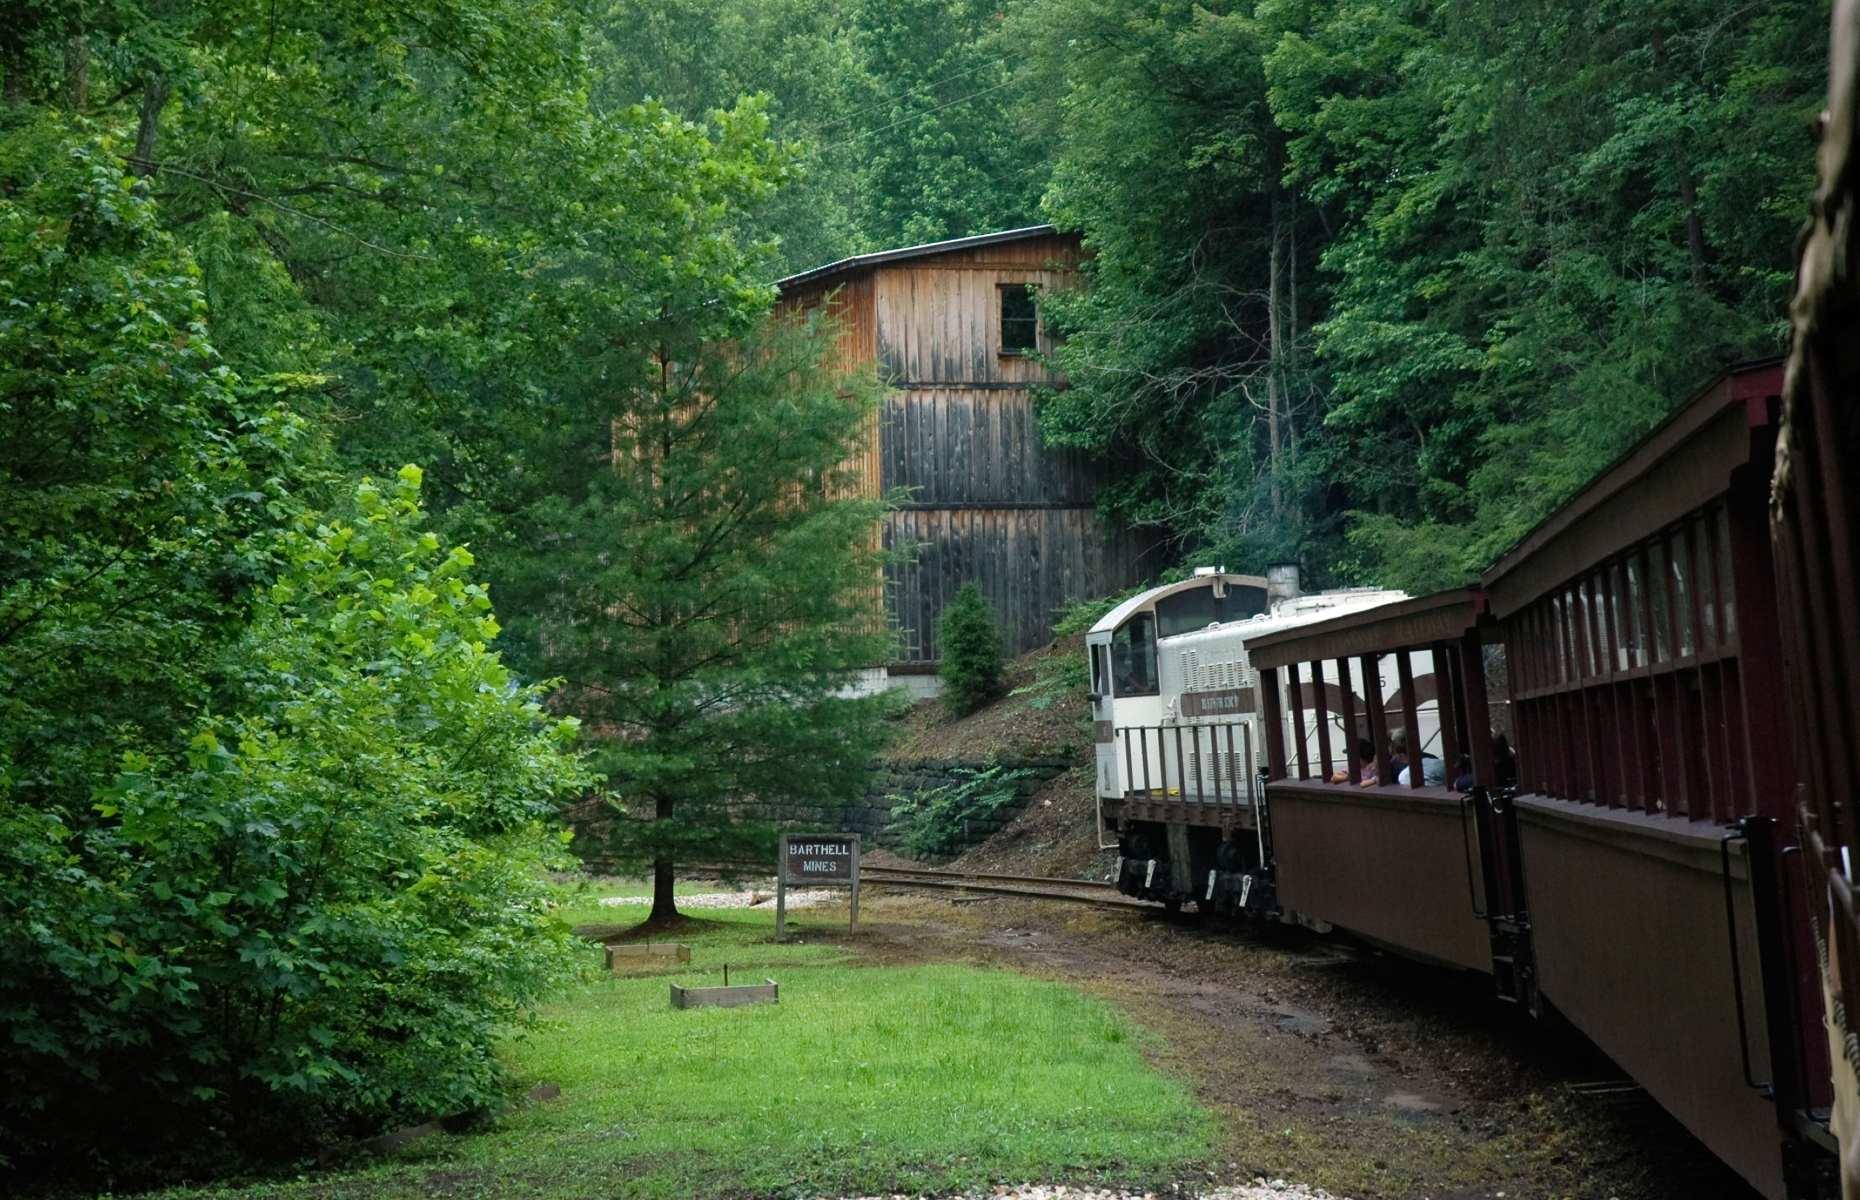 <p>The Big South Fork Scenic Railway often finds itself high up lists of America's most delightful rail journeys, especially during leaf-peeping season. Perfect for nature lovers and history buffs, this round-trip adventure clanks along accompanied by views of the Daniel Boone National Forest and the Big South Fork River and Recreation Area.</p>  <p>This trip culminates in a two-hour layover at the Barthell Coal Camp where passengers can learn about life during the early 1900s in the southernmost Appalachians.</p>